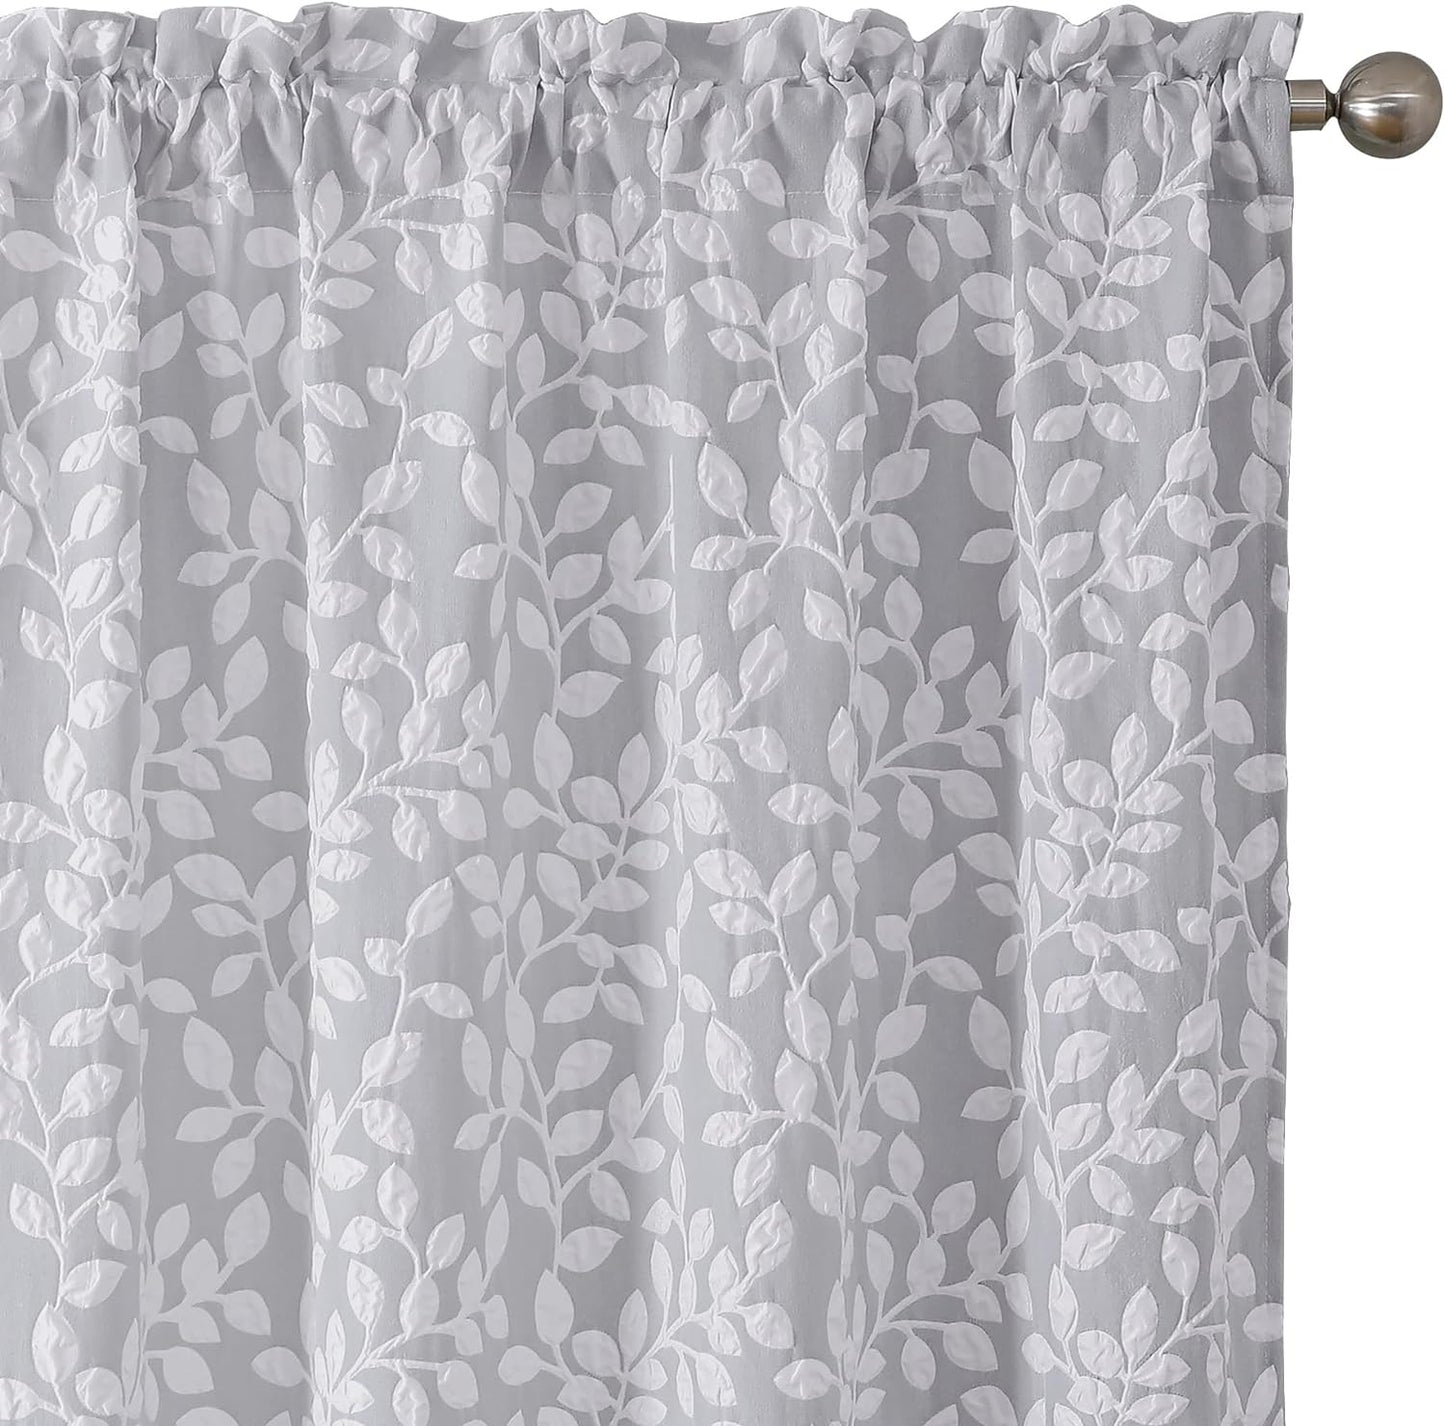 Chyhomenyc Anna White Taupe Curtains 63 Inch Length 2 Panels, Light Filtering Soft Airy 3D Embossed Textured Leaf Pattern Drapes for Bedroom Living Room Windows, Each 42Wx63L Inches  Chyhomenyc Gray White 42 W X 54 L 